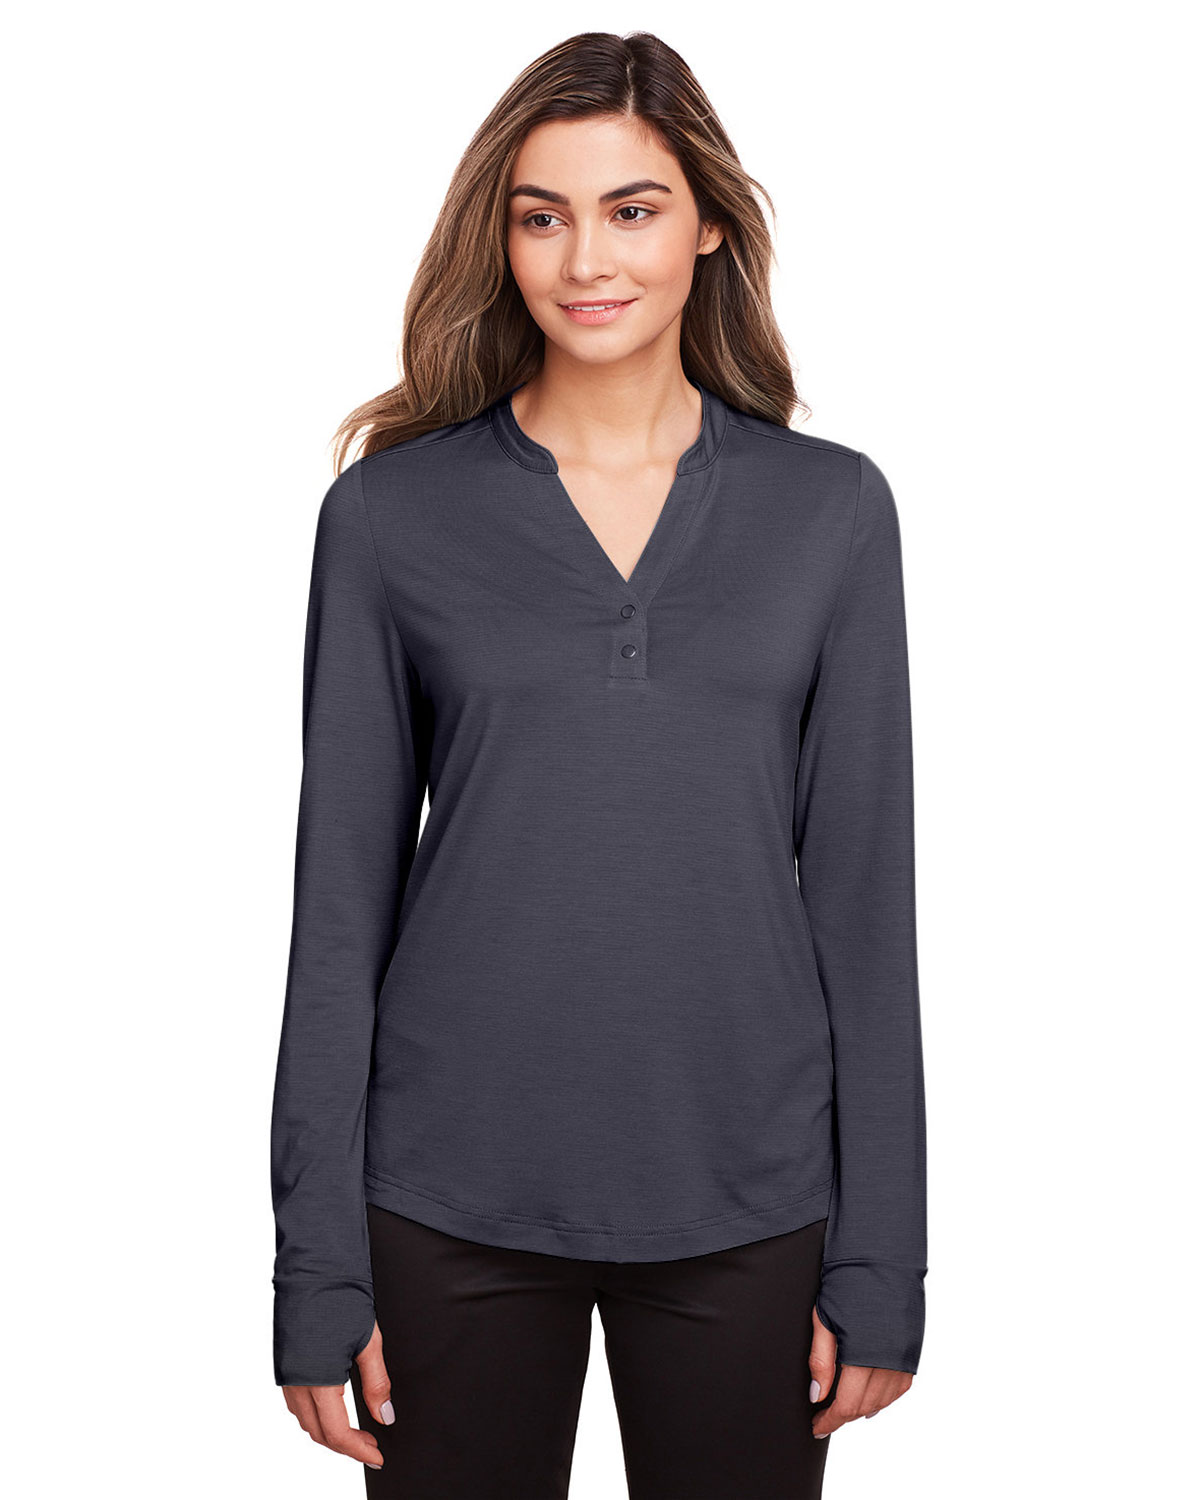 North End NE400W Women Ladies' Jaq Snap-Up Stretch Performance Pullover at Apparelstation